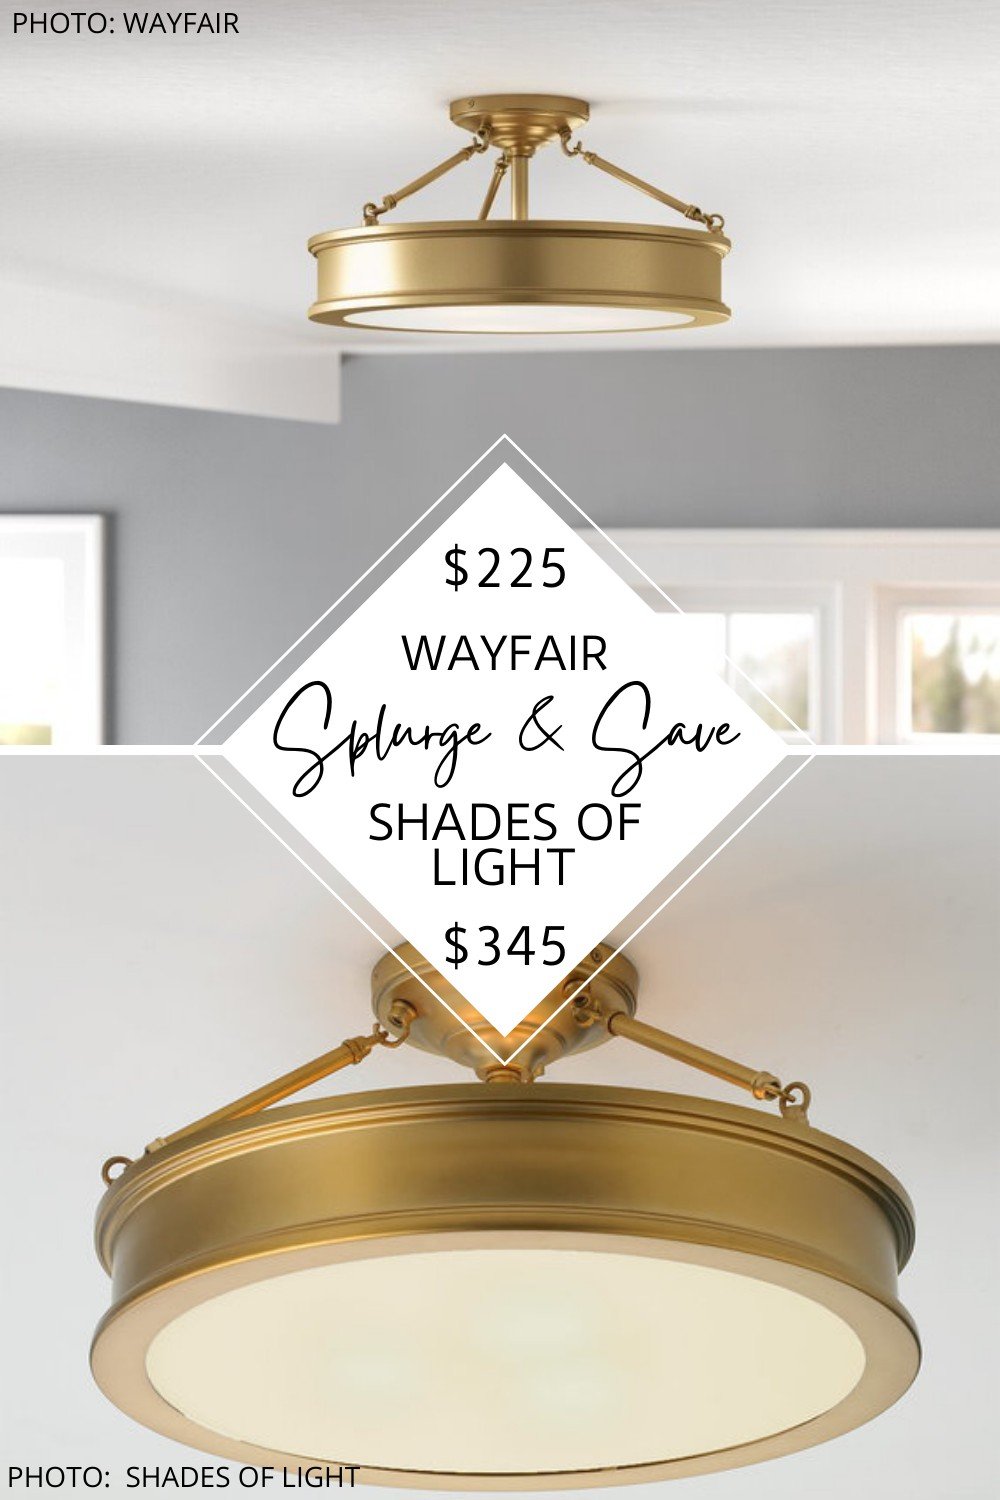 SHADES OF LIGHT TRADITIONAL URBAN SEMI-FLUSH CEILING LIGHT DUPE — KENDRA  FOUND IT